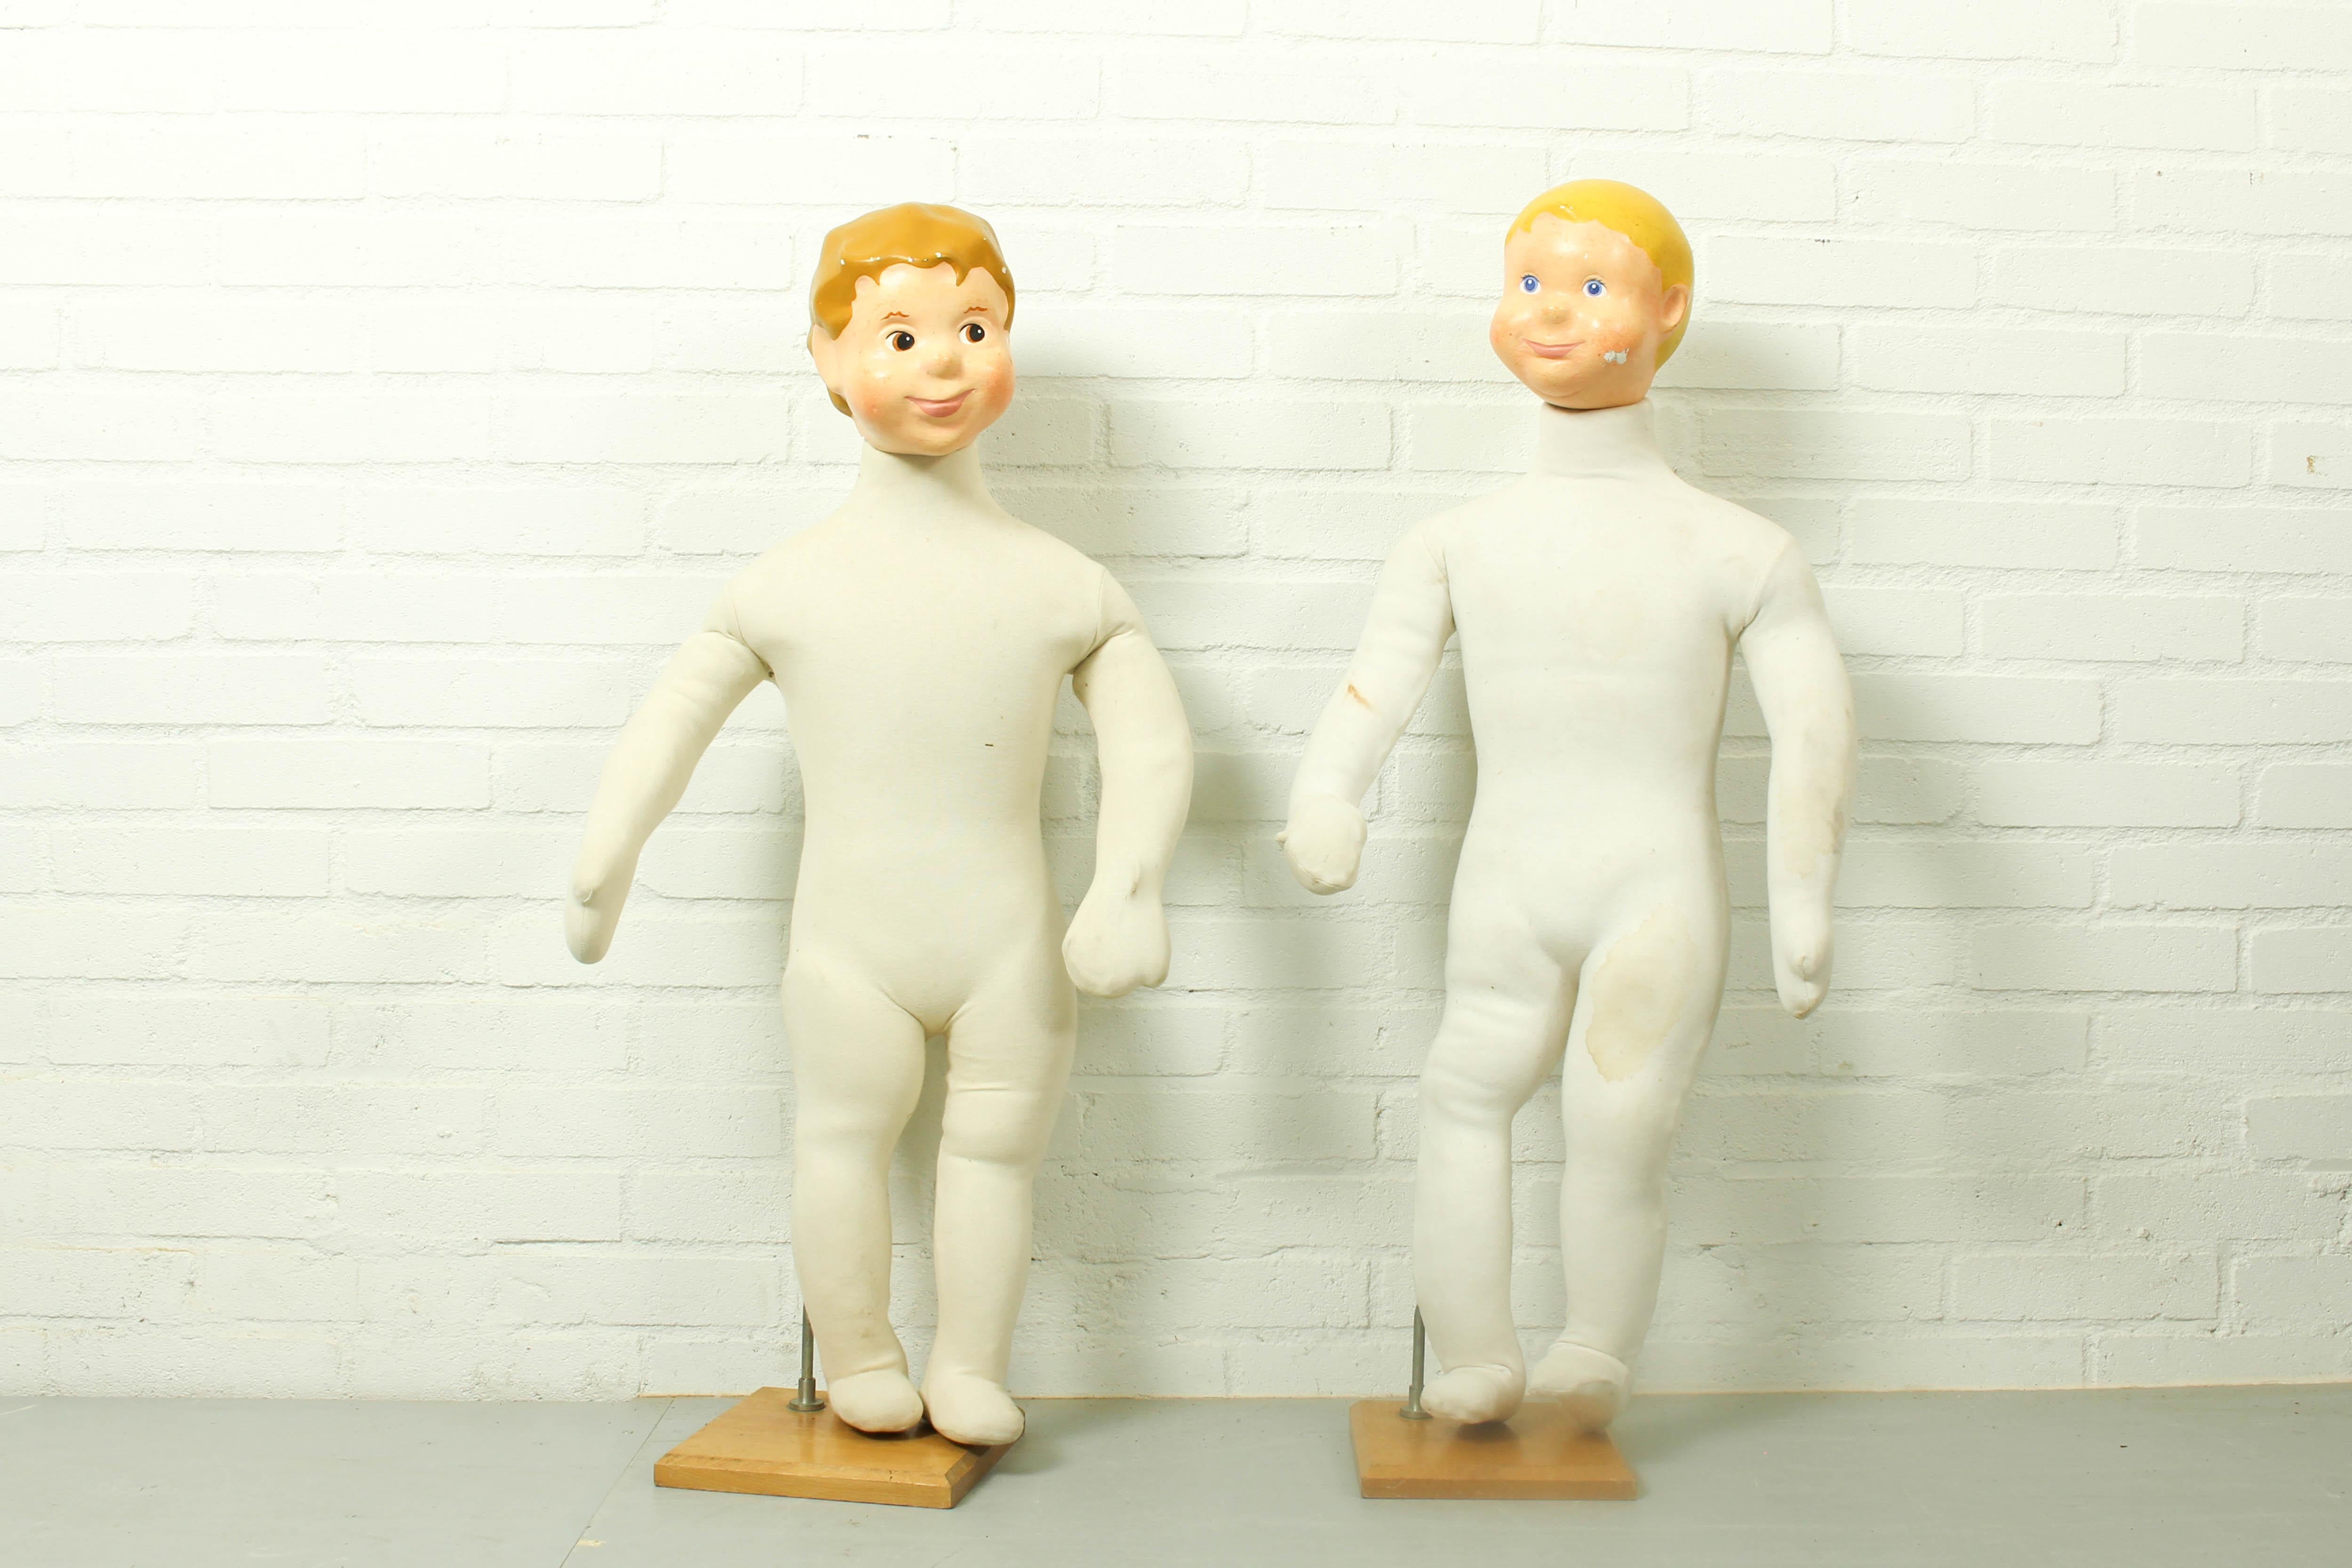 Mid century child mannequin doll. These vintage mannequins are both male children. They have a soft tissue body and beautiful fiberglass cartoon style heads. These store display advertising dolls were probably designed for a clothing line which was